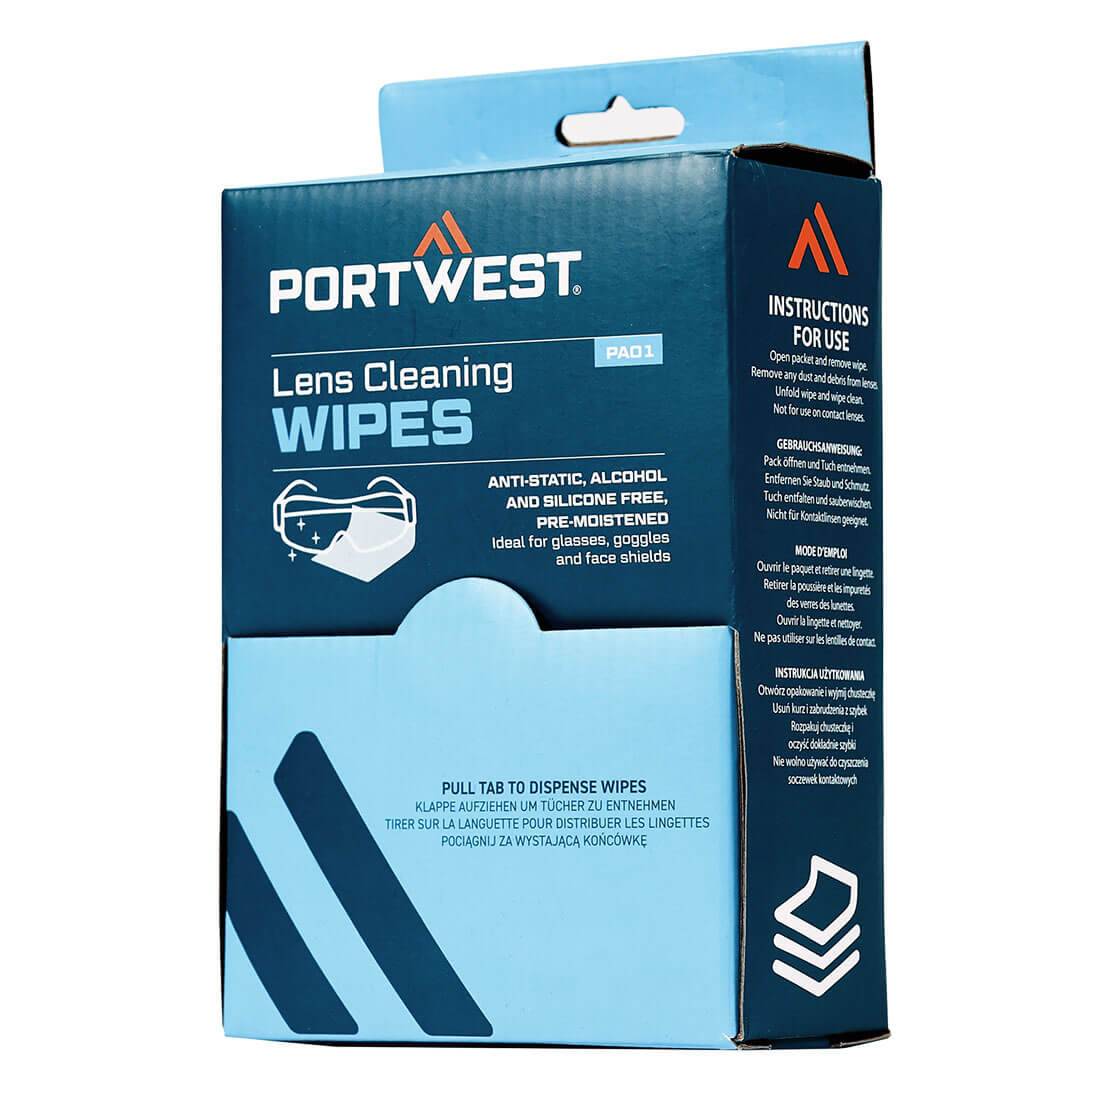 PA01 - Lens Cleaning Wipes